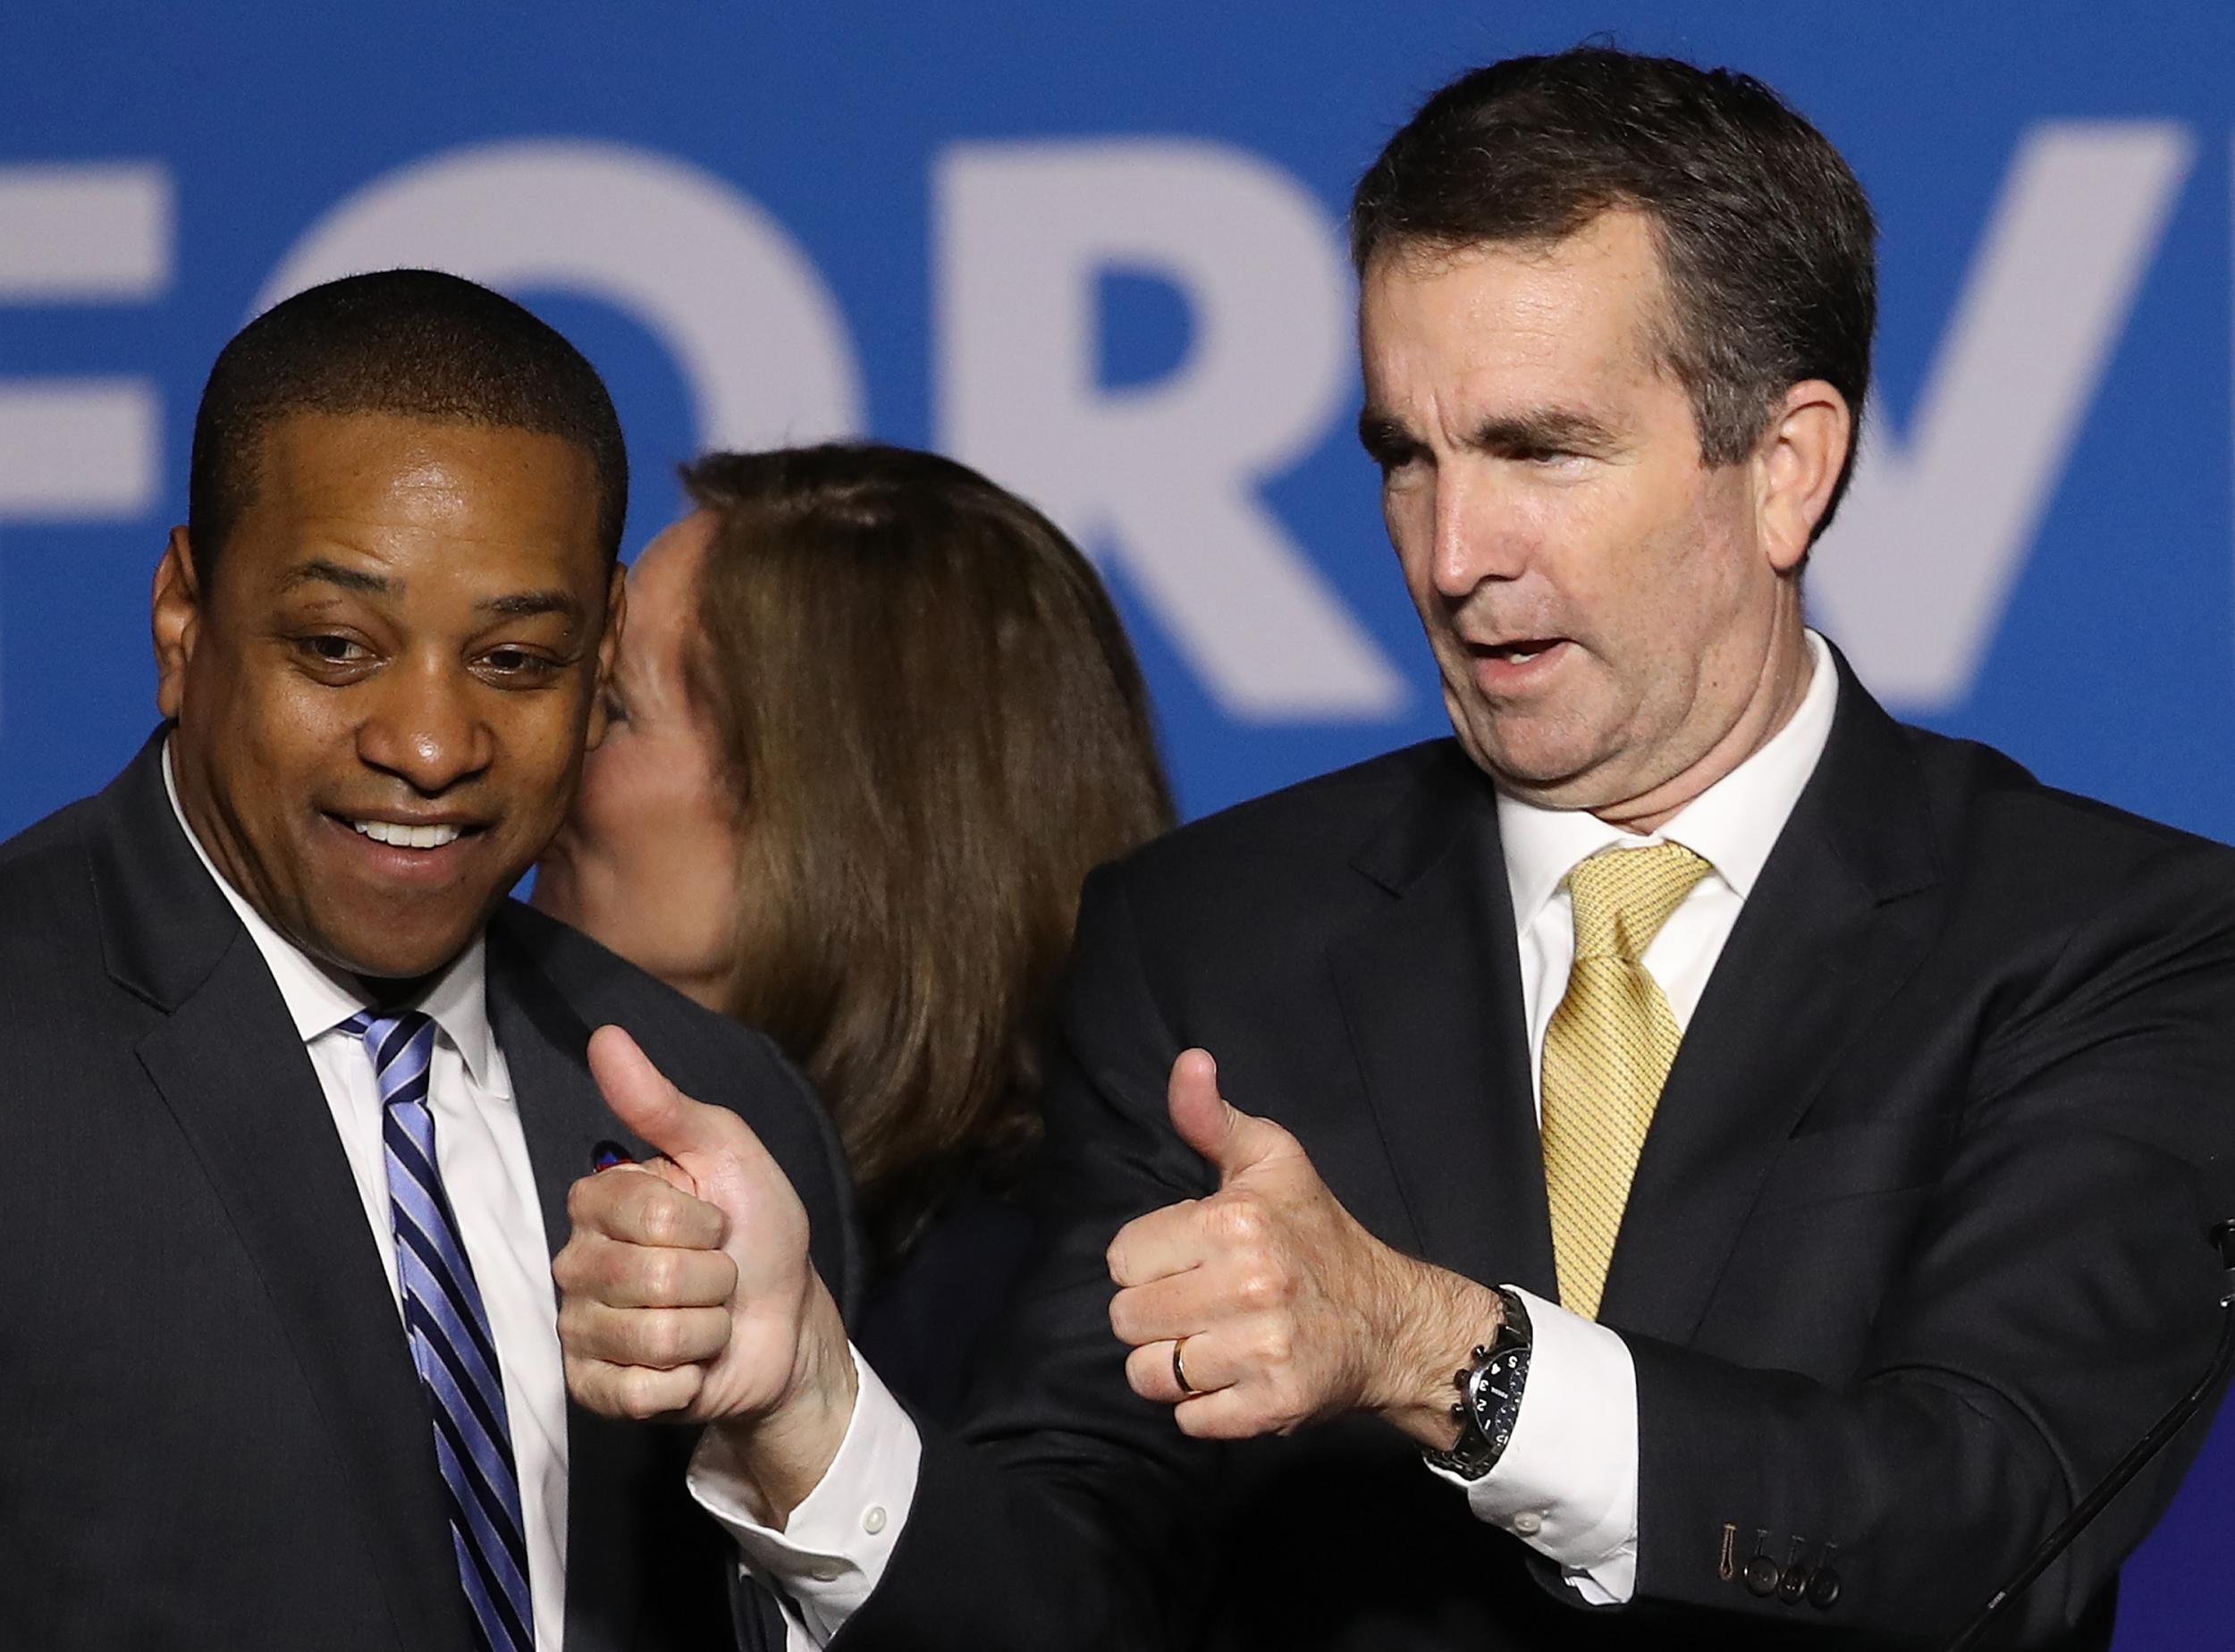 Ralph Northam's gubernatorial win was a part of a Democratic wave in Virginia